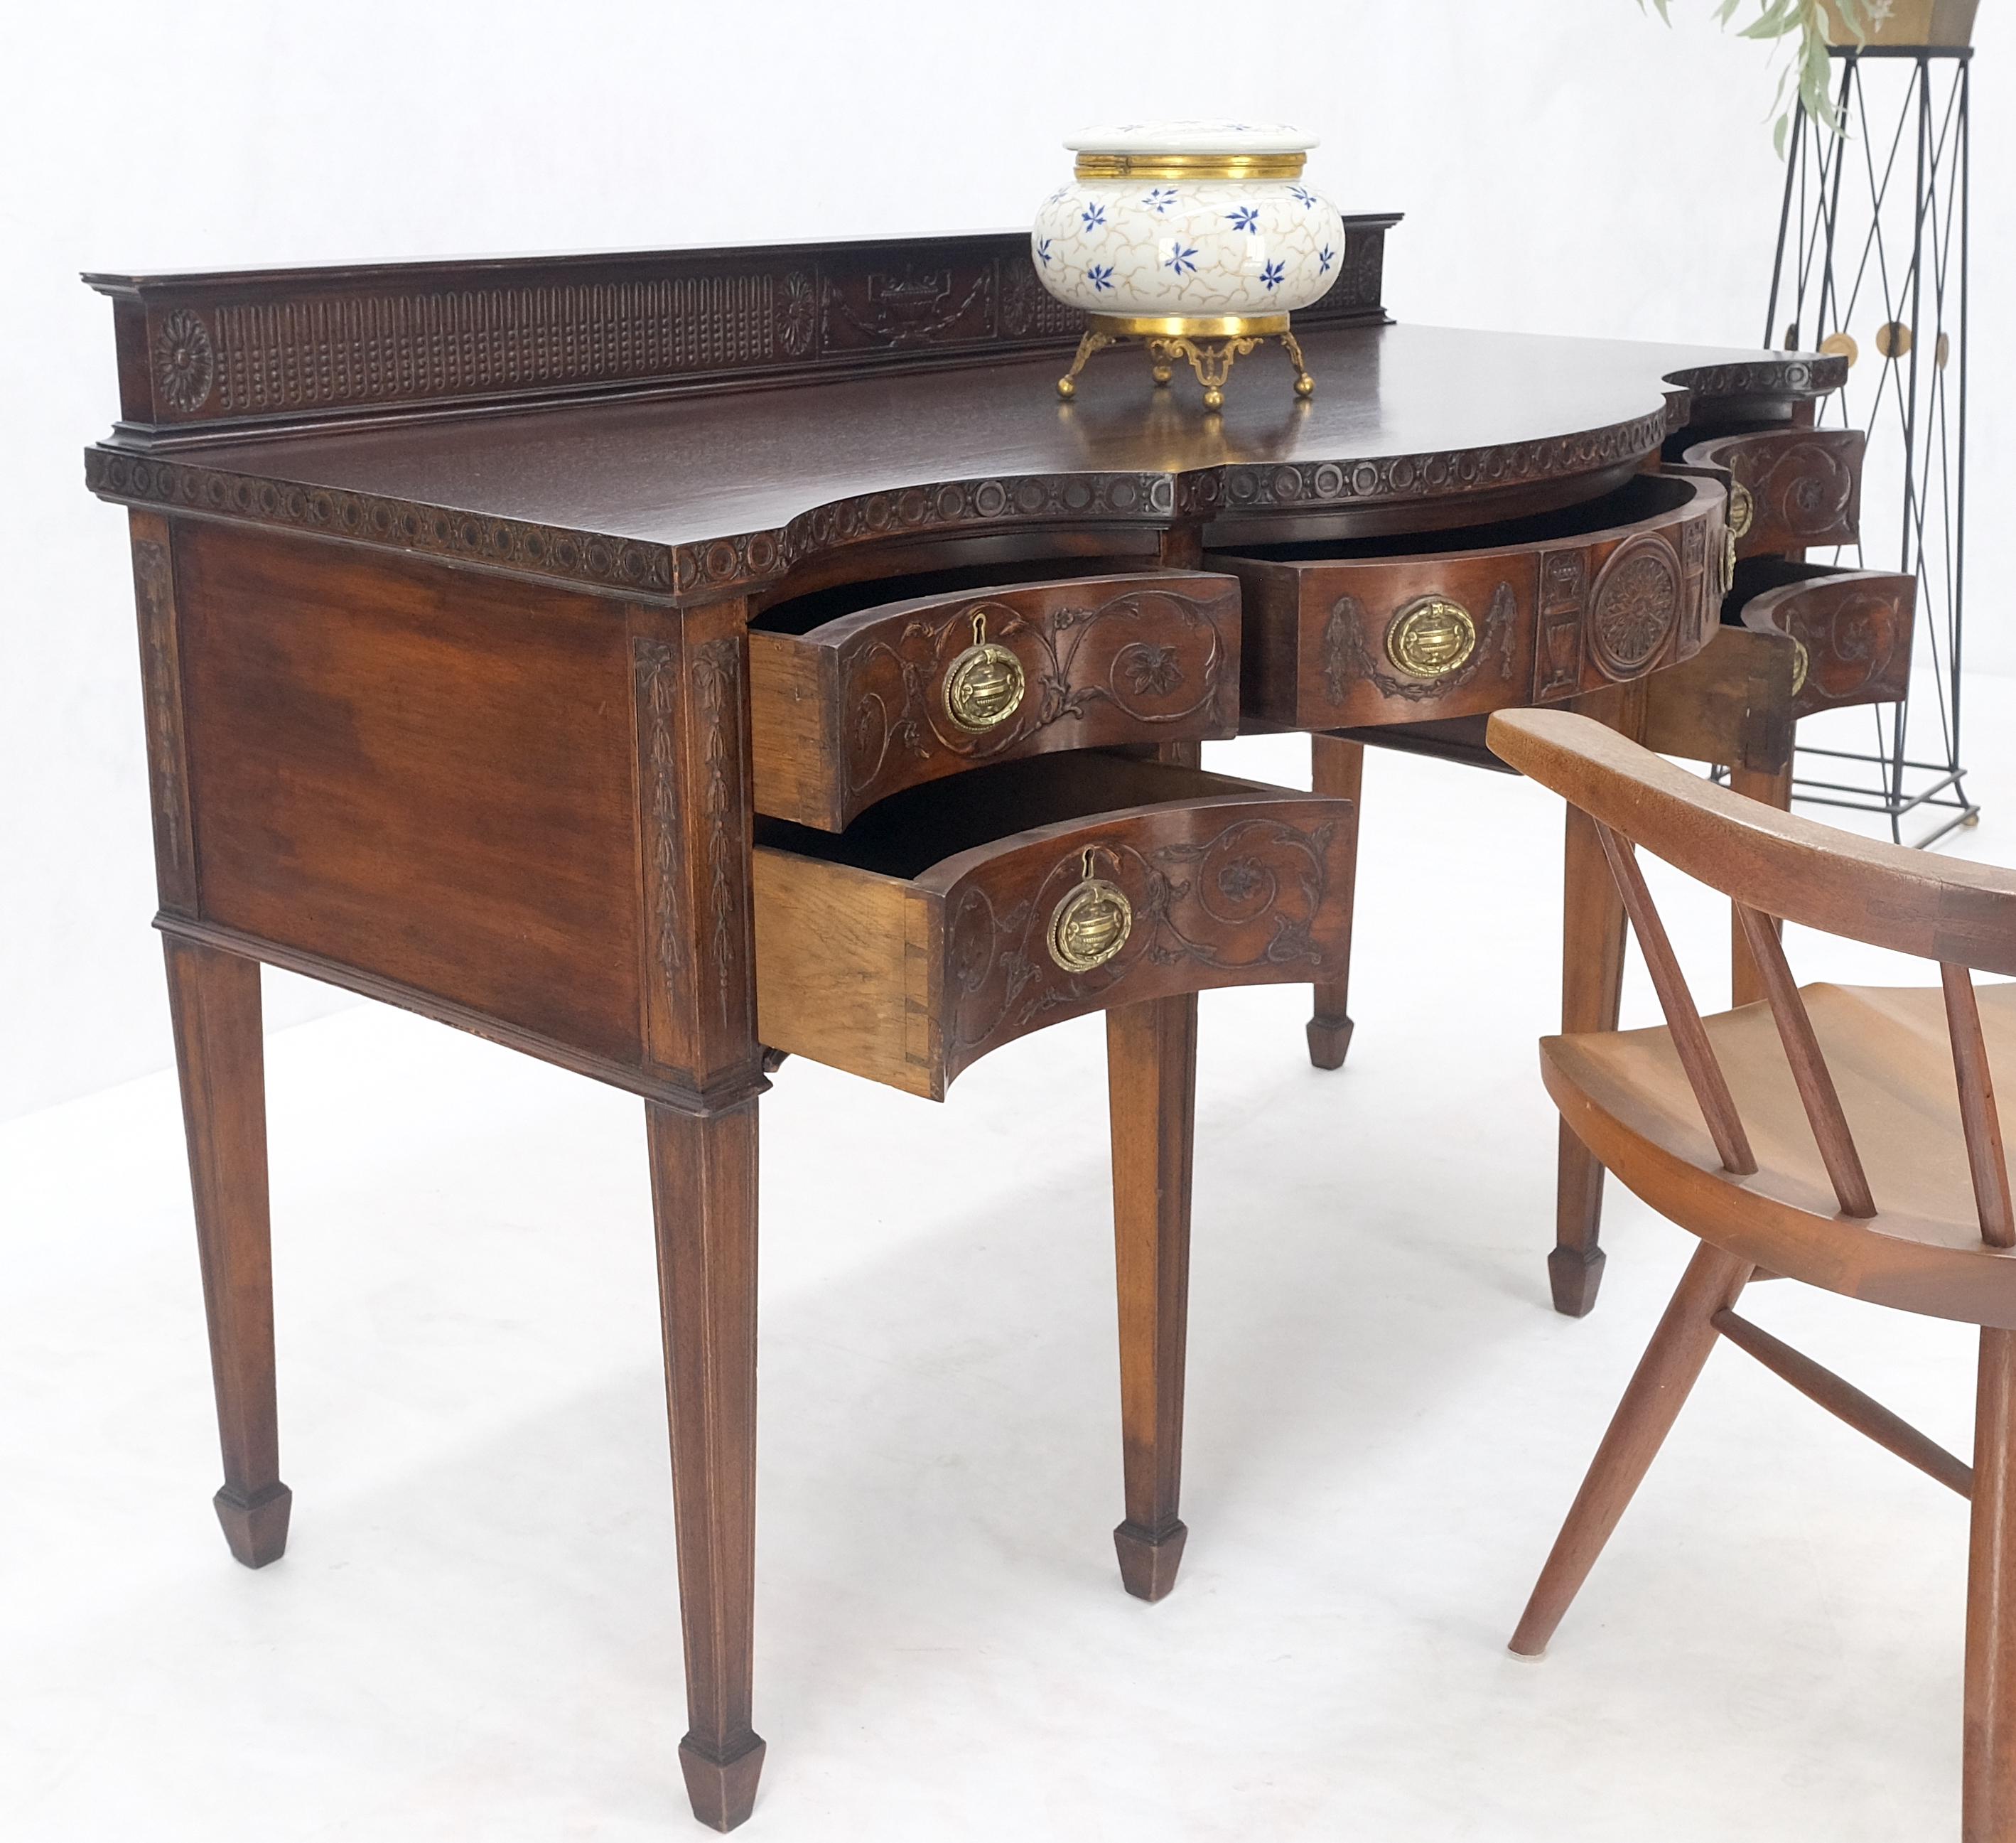 Fine Bench Made Carved Mahogany Serpentine Front  Dovetail Drawers Vanity Desk Dressing Table.
The discoloration spot is under the finish, finish all in excellent condition.